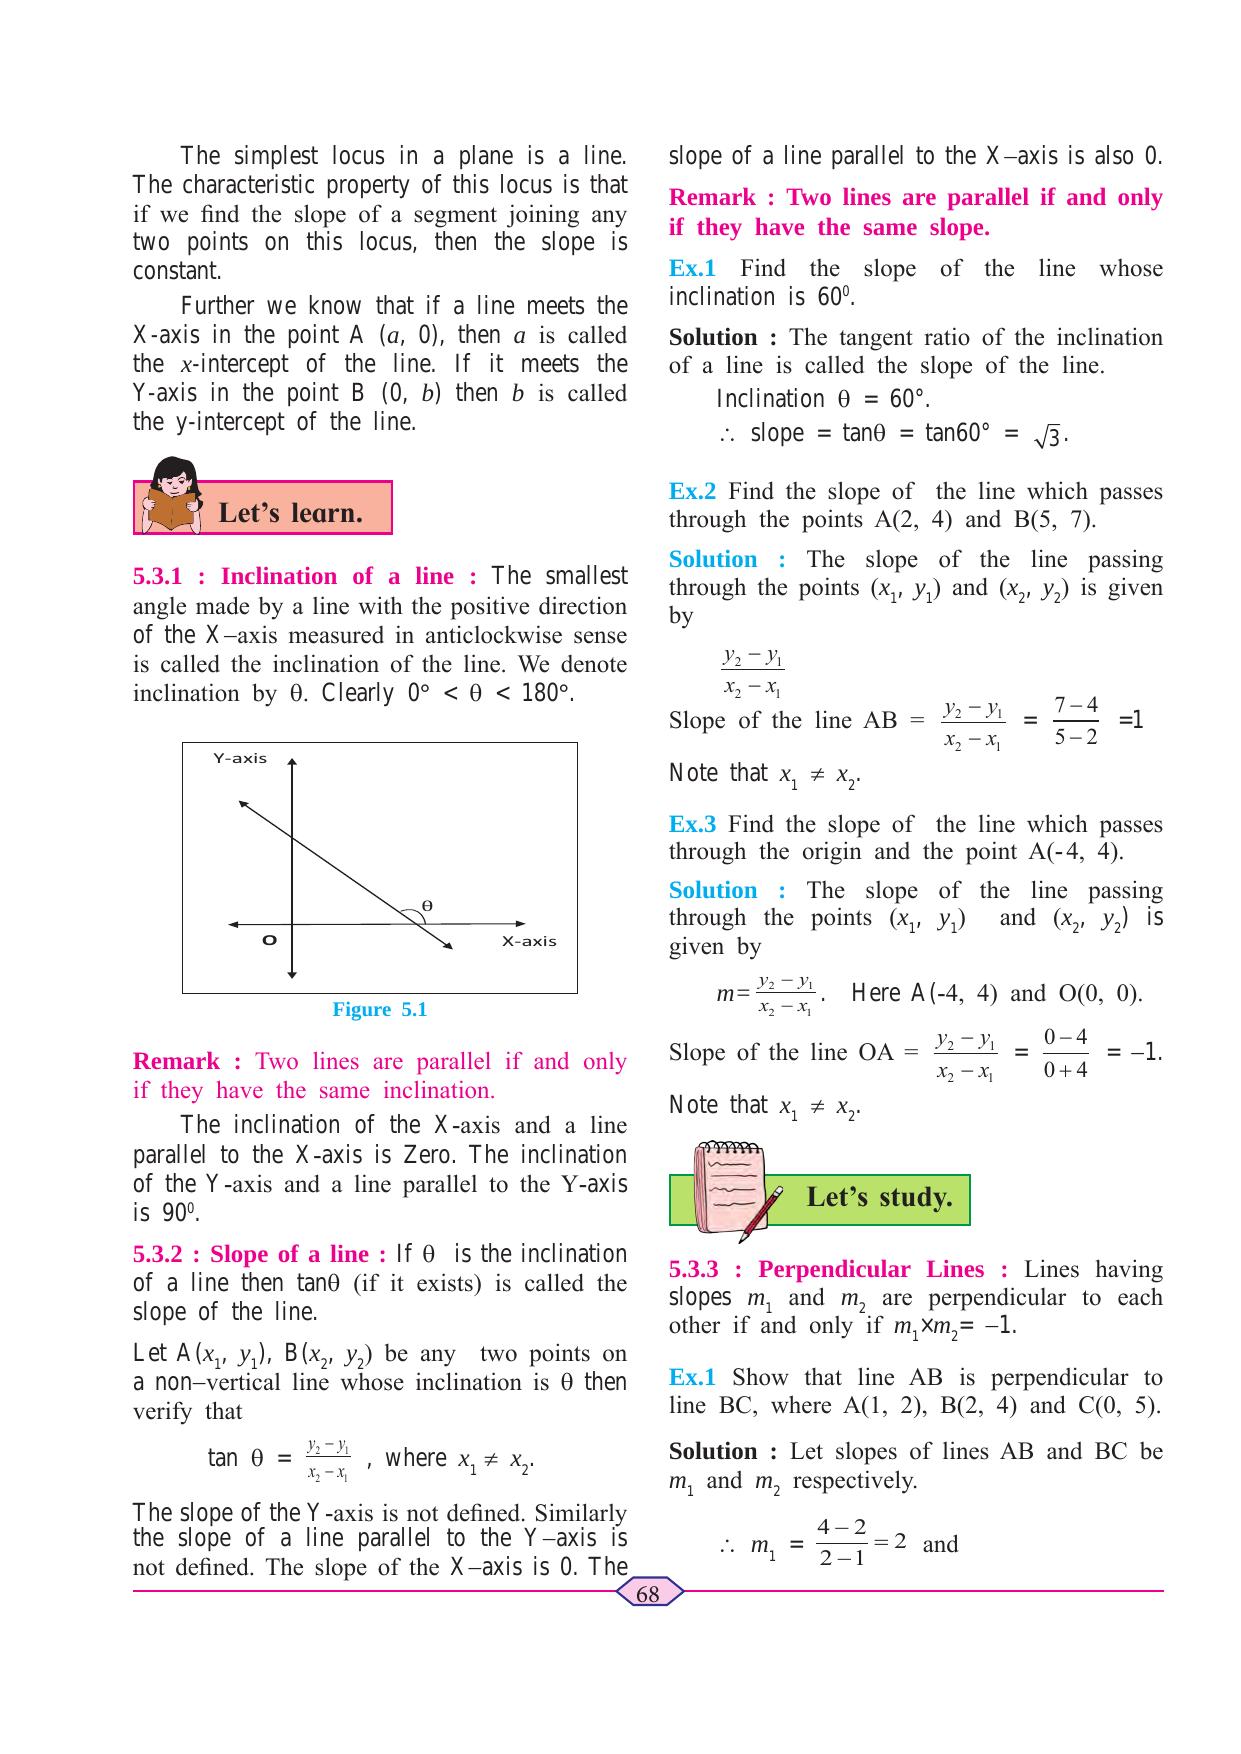 Maharashtra Board Class 11 Maths (Commerce) (Part 1) Textbook - Page 78